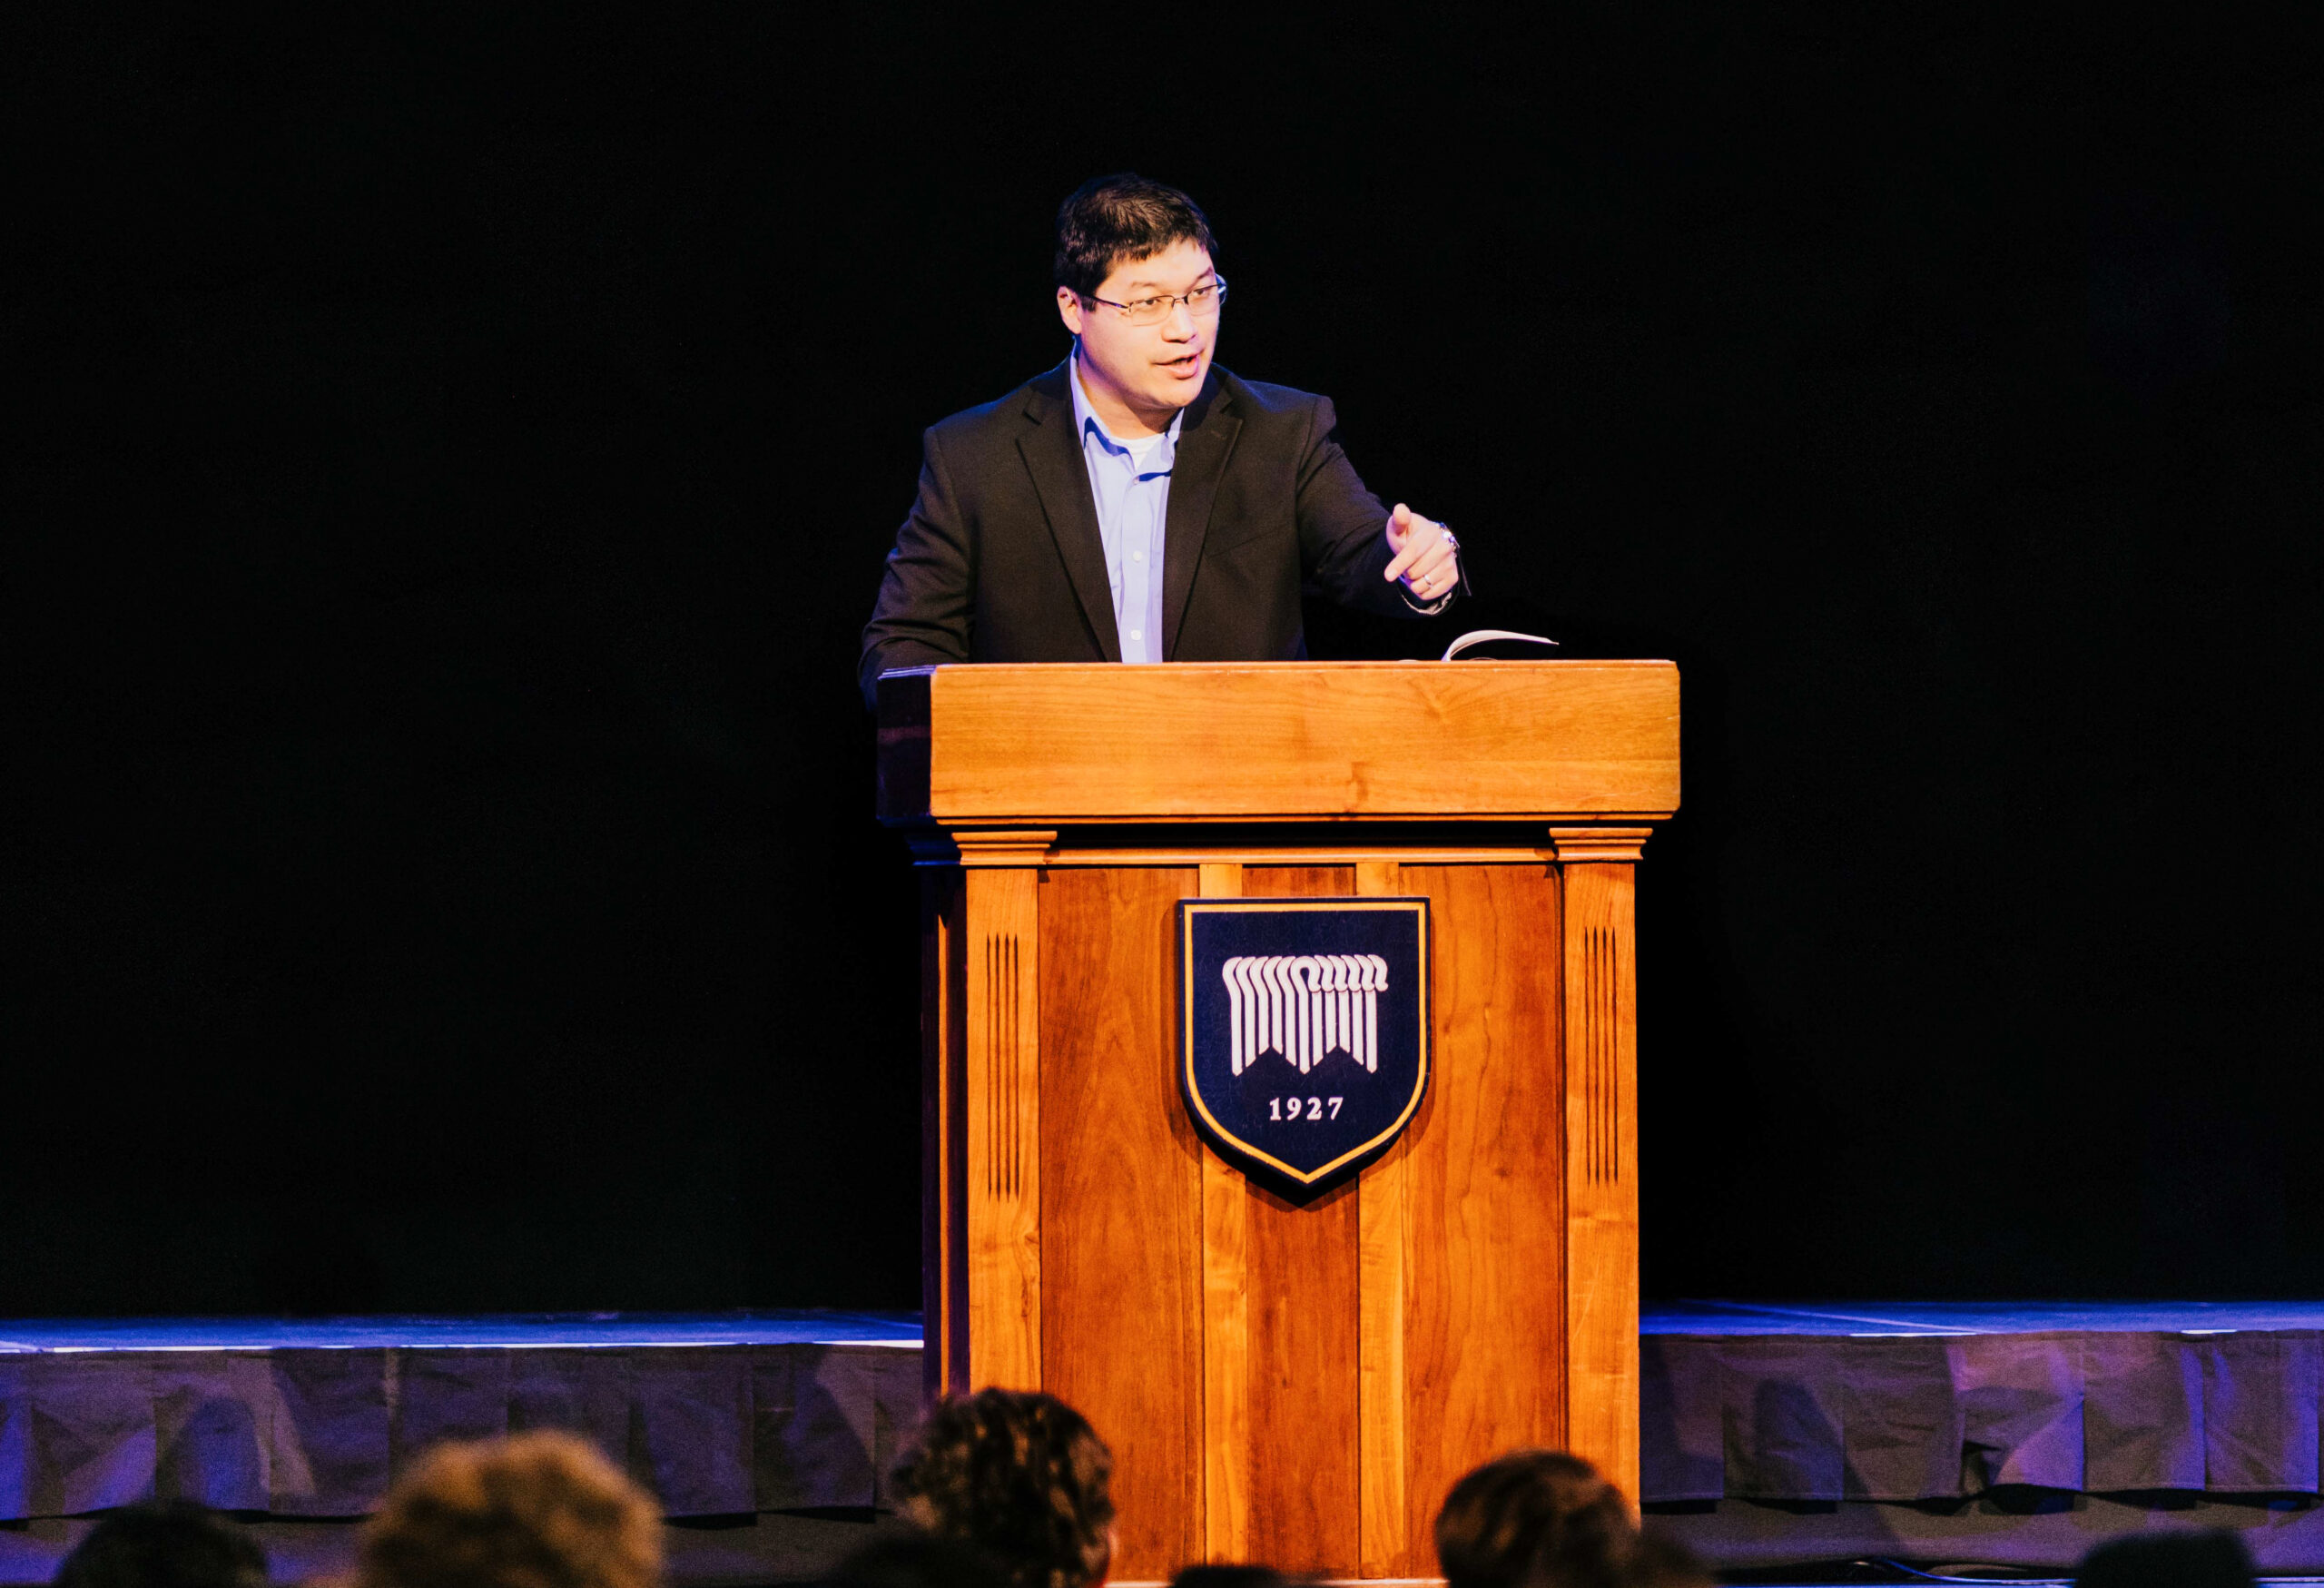 Video: Dr. Chou Highlights the Greatness of God in Job 38 Featured Image